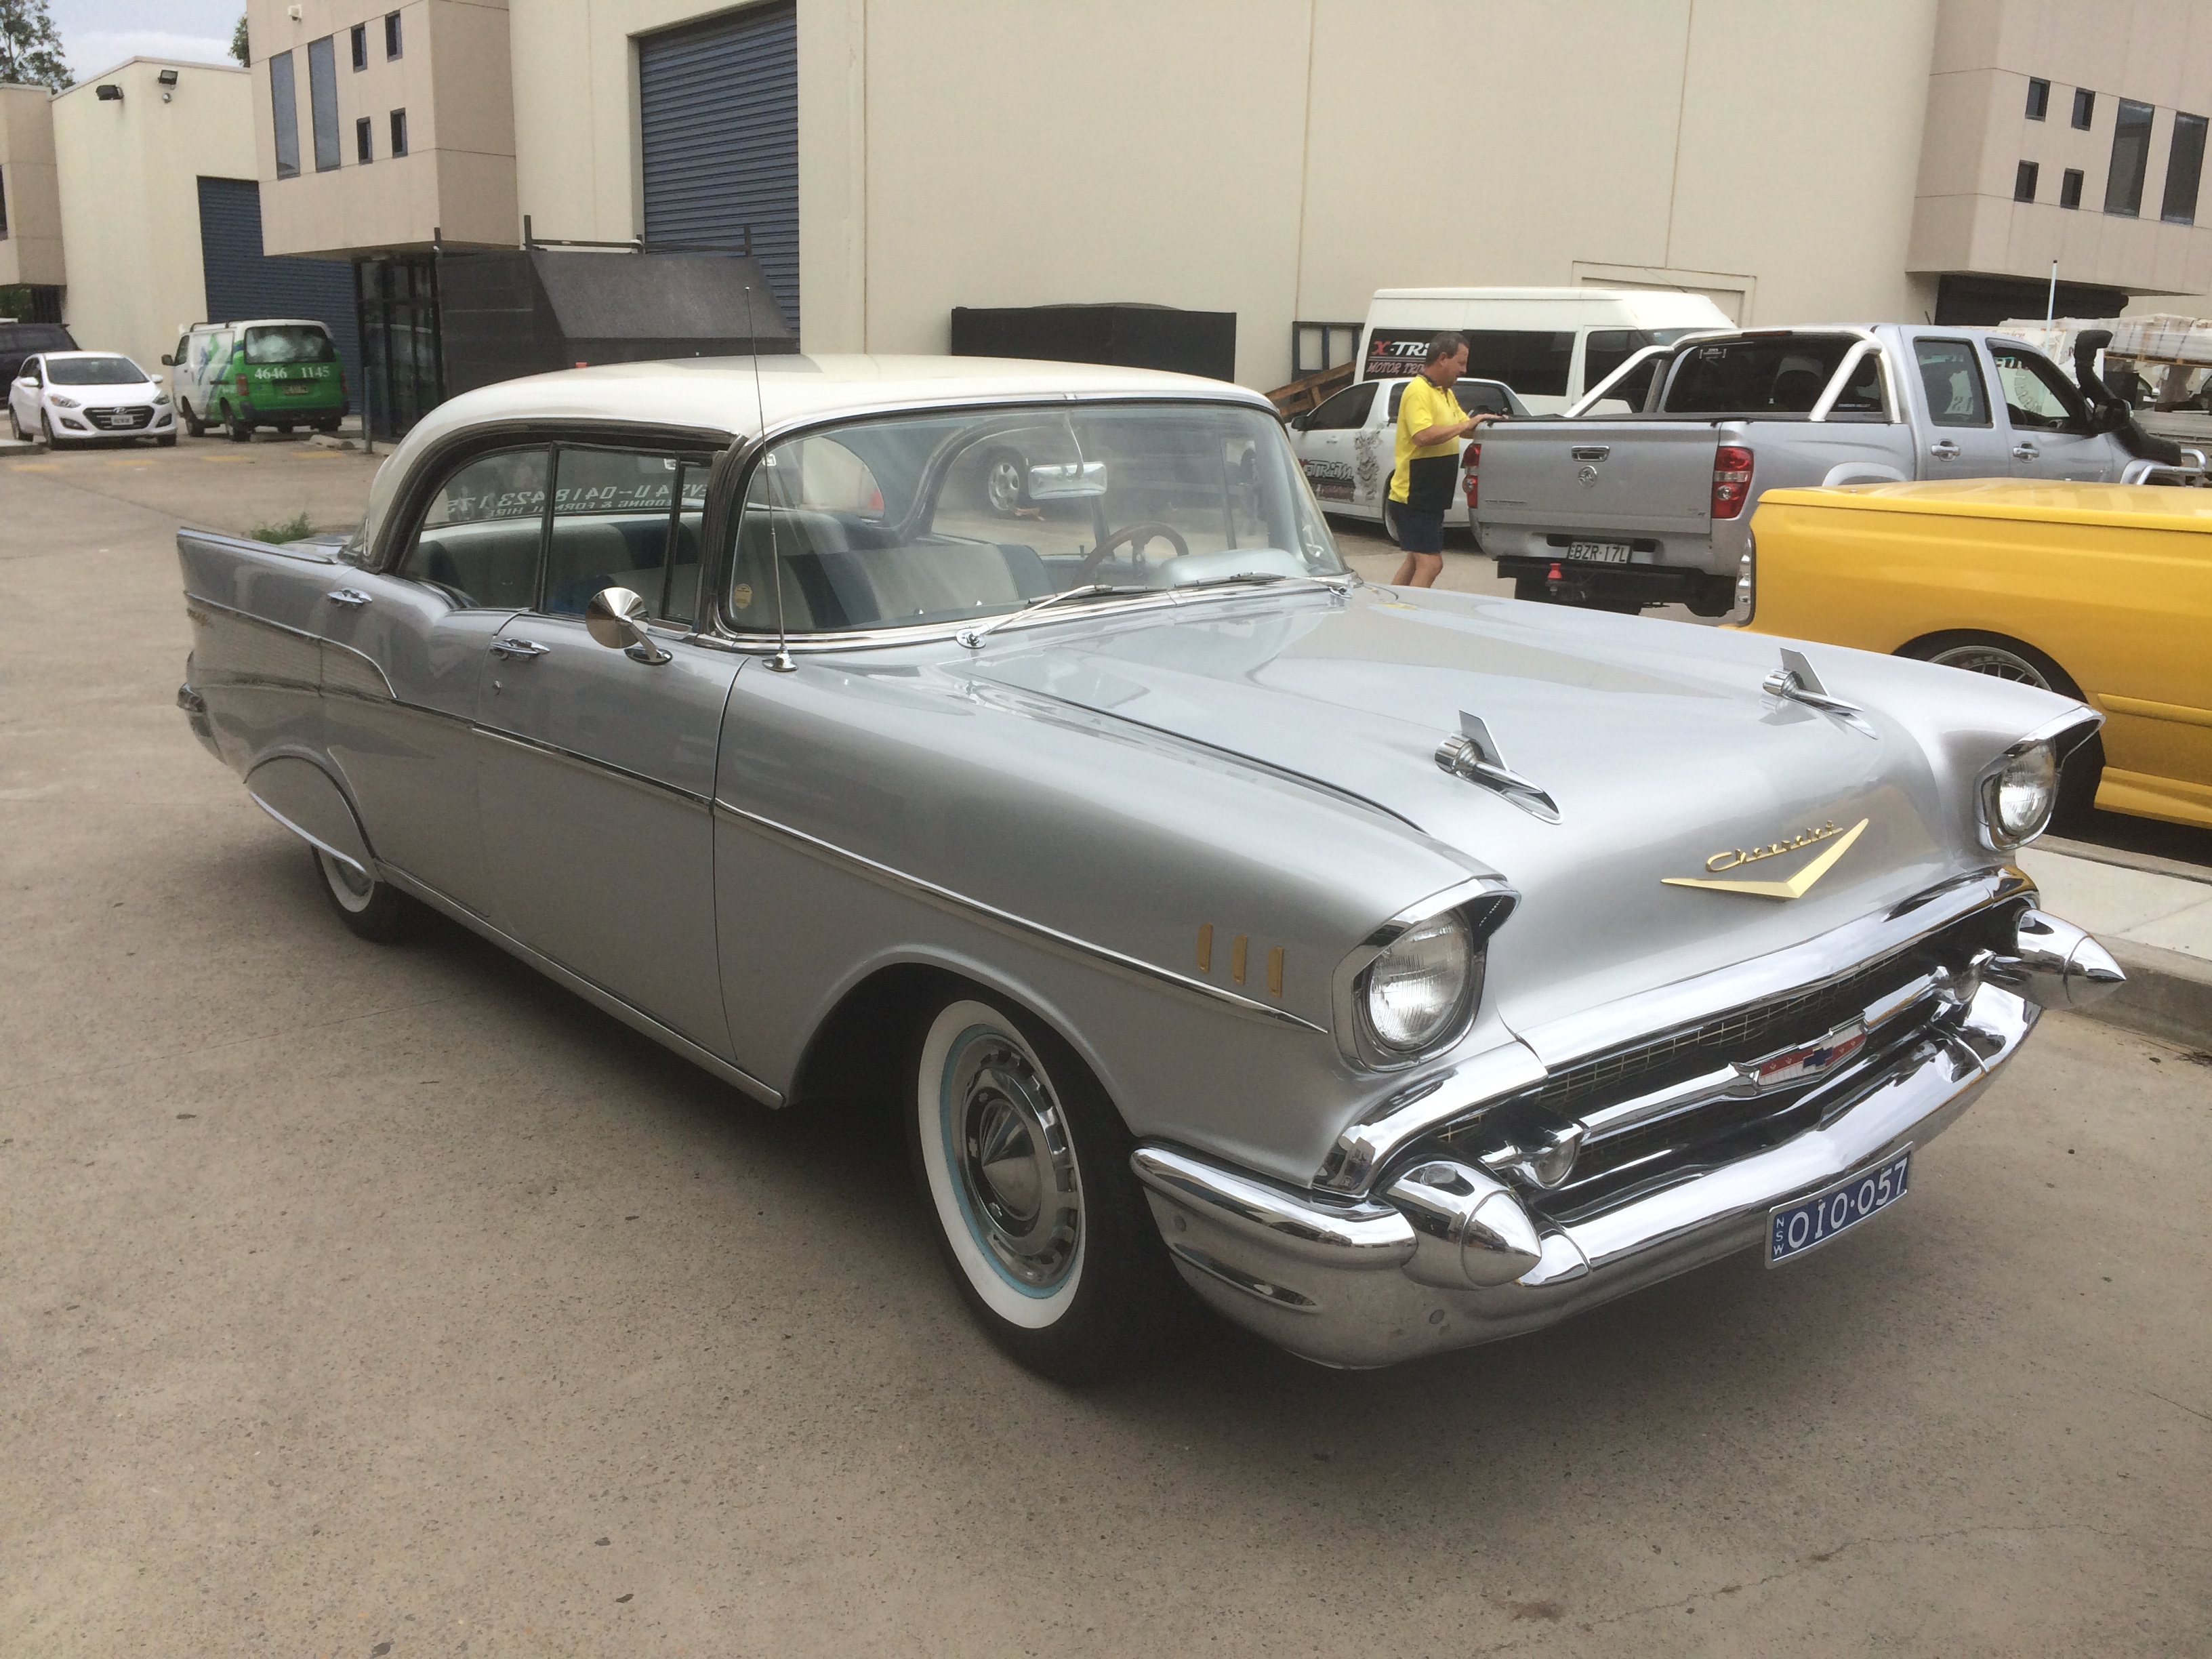 Silver and White ’57 Chev